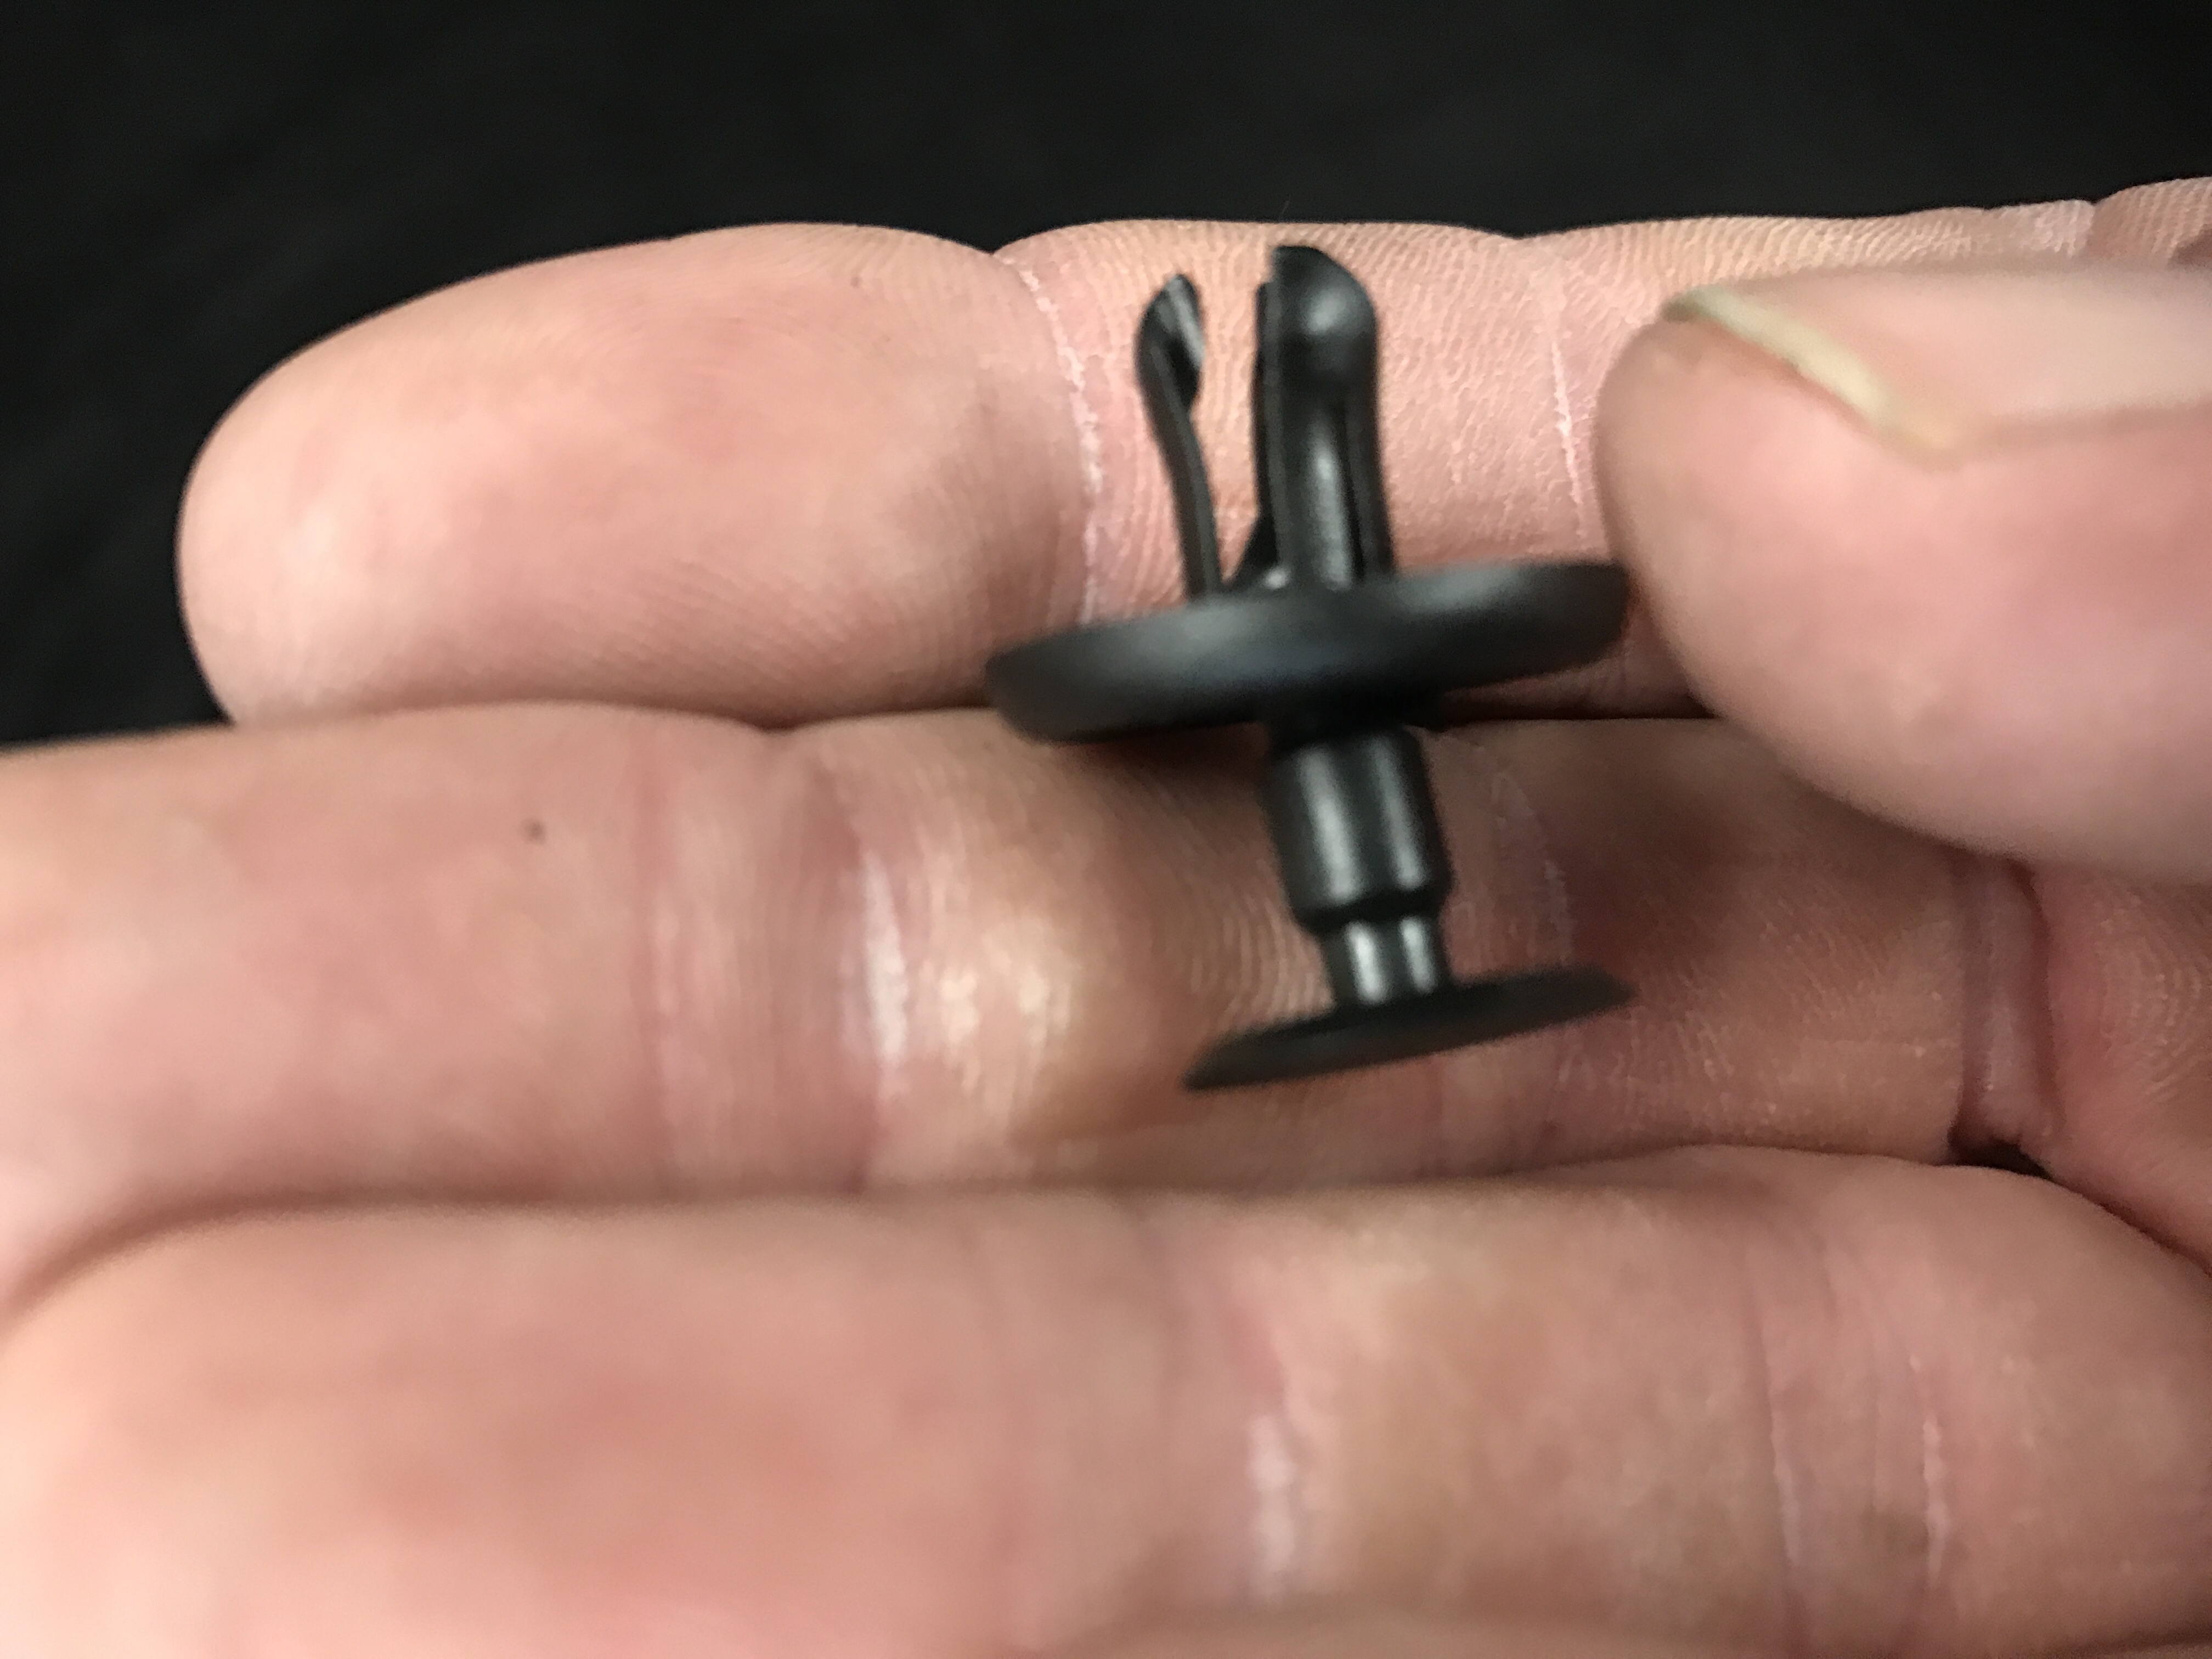 2011 Toyota Camry Interior Liner Clip, removed from the vehicle, to prepare for the dent removal process. Http://217dent.com out of Springfield, IL